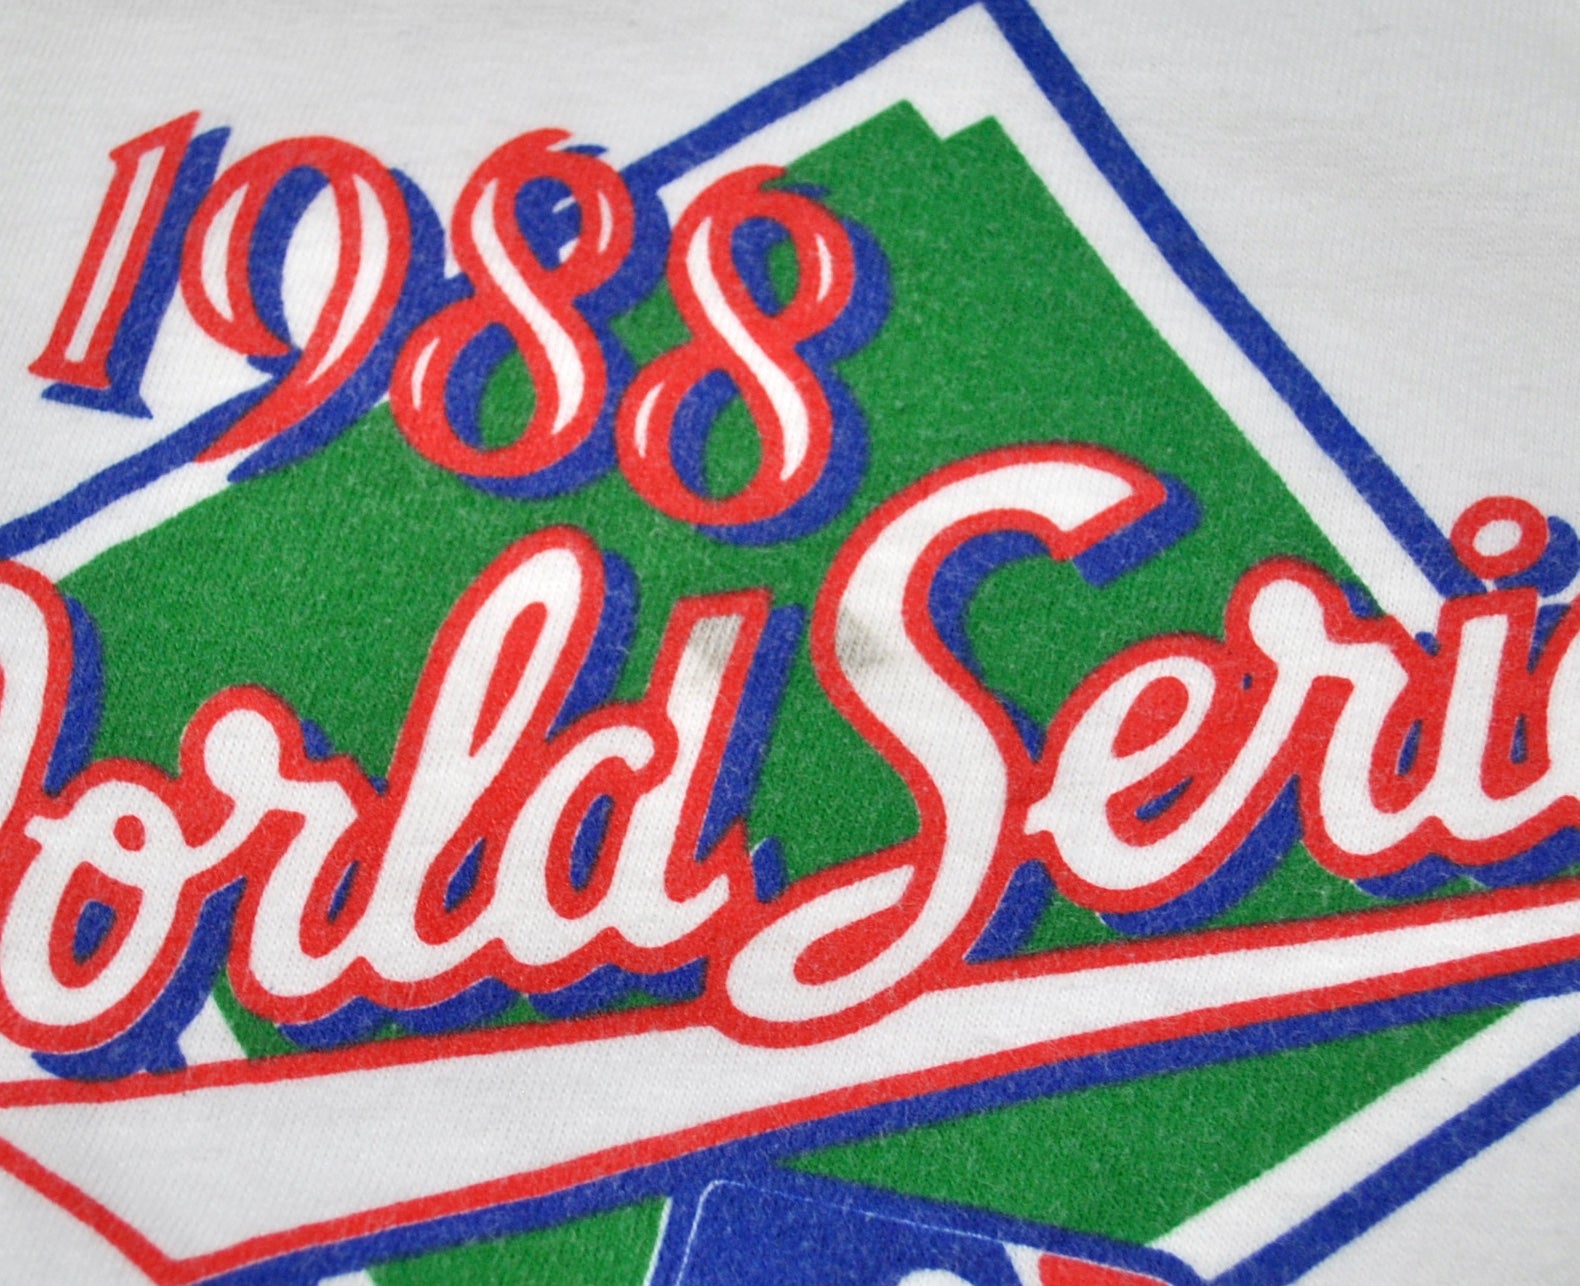 Sports / College Vintage MLB World Champions Chicago Cubs Tee Shirt 1988 Size Medium Made in USA